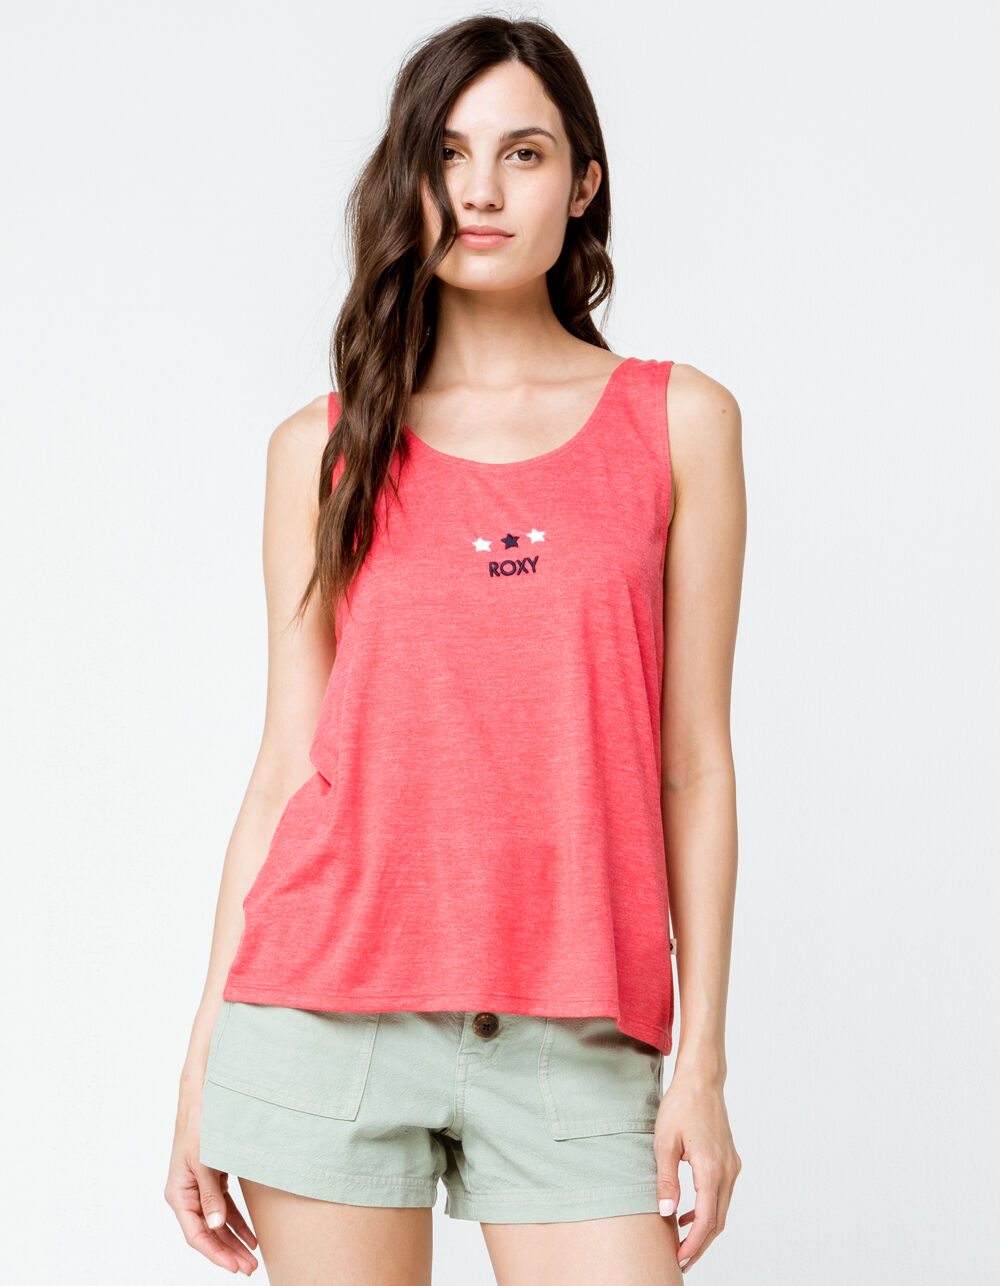 ROXY Summer Of Pop Womens Tank Top image number 0